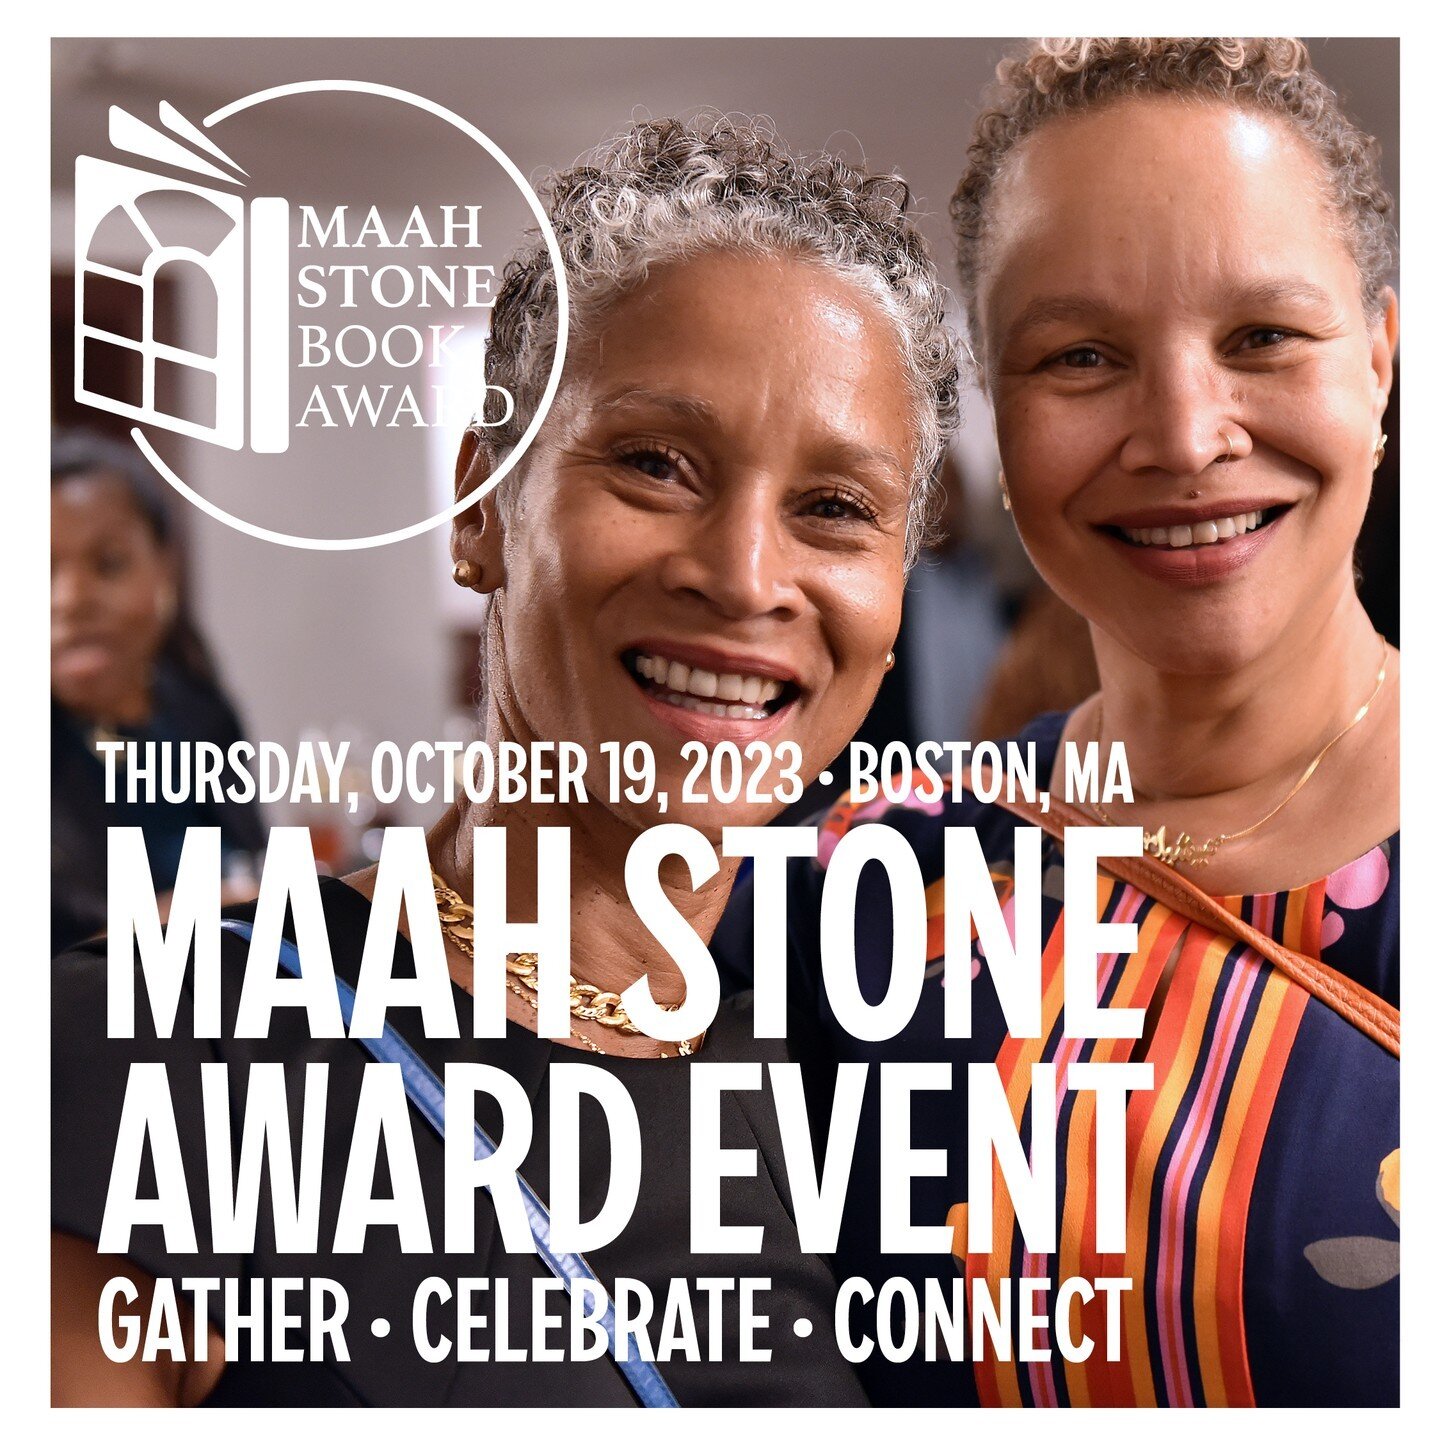 CONNECT with your peeps again at the 2023 MAAH Stone Book Award Event IN-PERSON on October 19th. Register today (link in bio). Reception at the African Meeting House @ 5:30pm. Awards presentation (also live-streamed) at 6:30pm (ET). Tell your friends